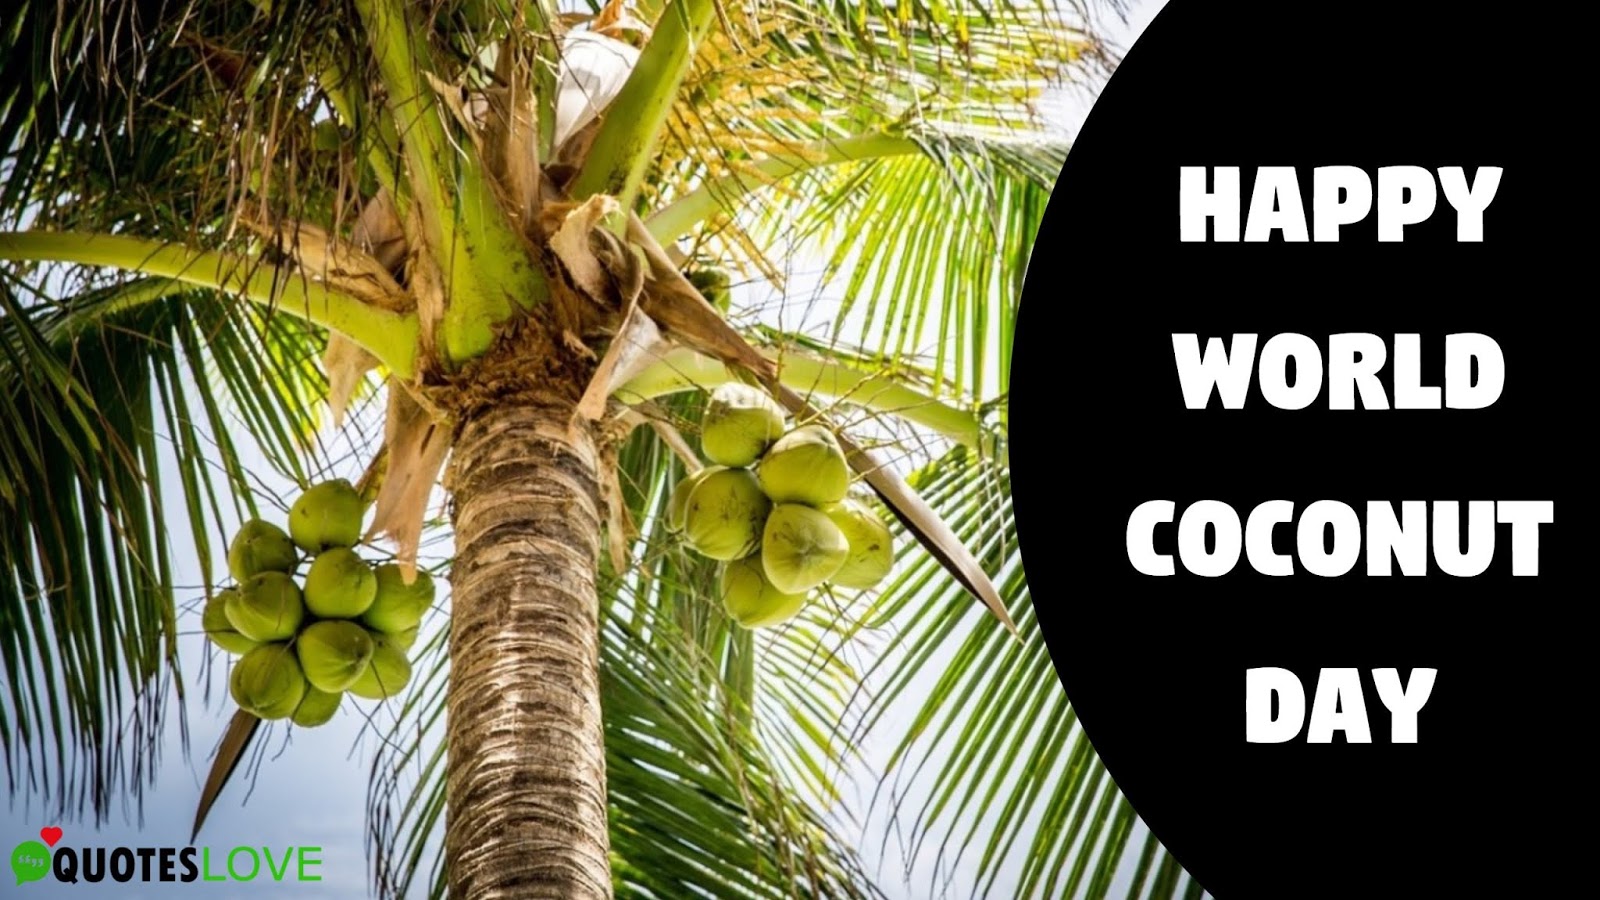 30+ Best Happy World Coconut Day 2019 Wishes, Quotes, Images And Messages For You